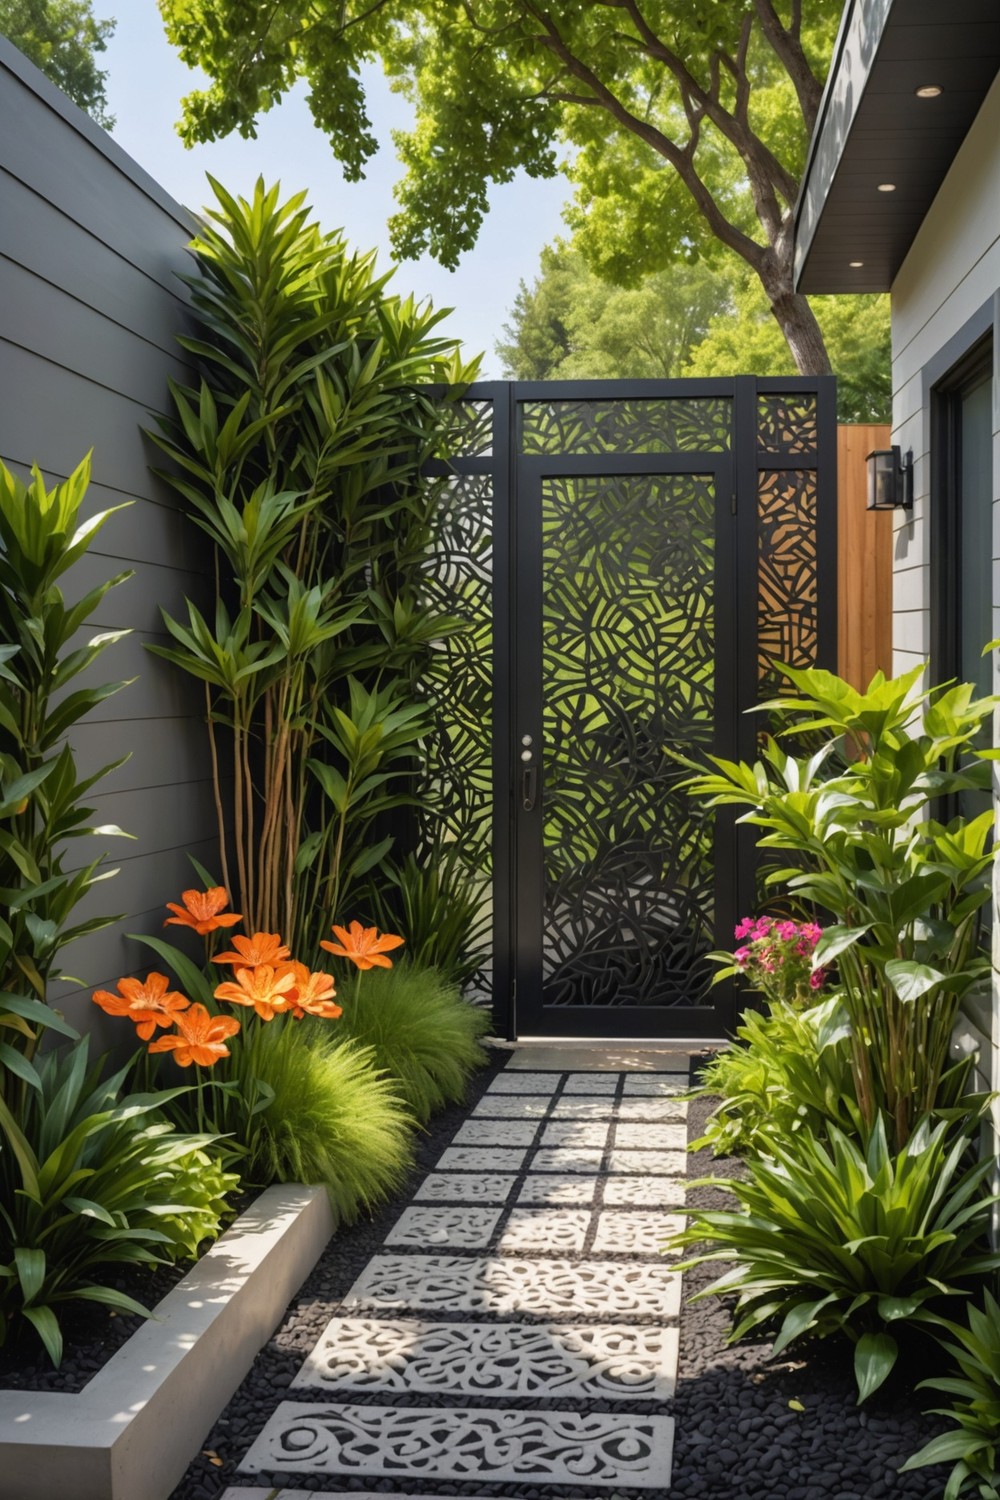 Using Decorative Screens and Panels for Added Privacy